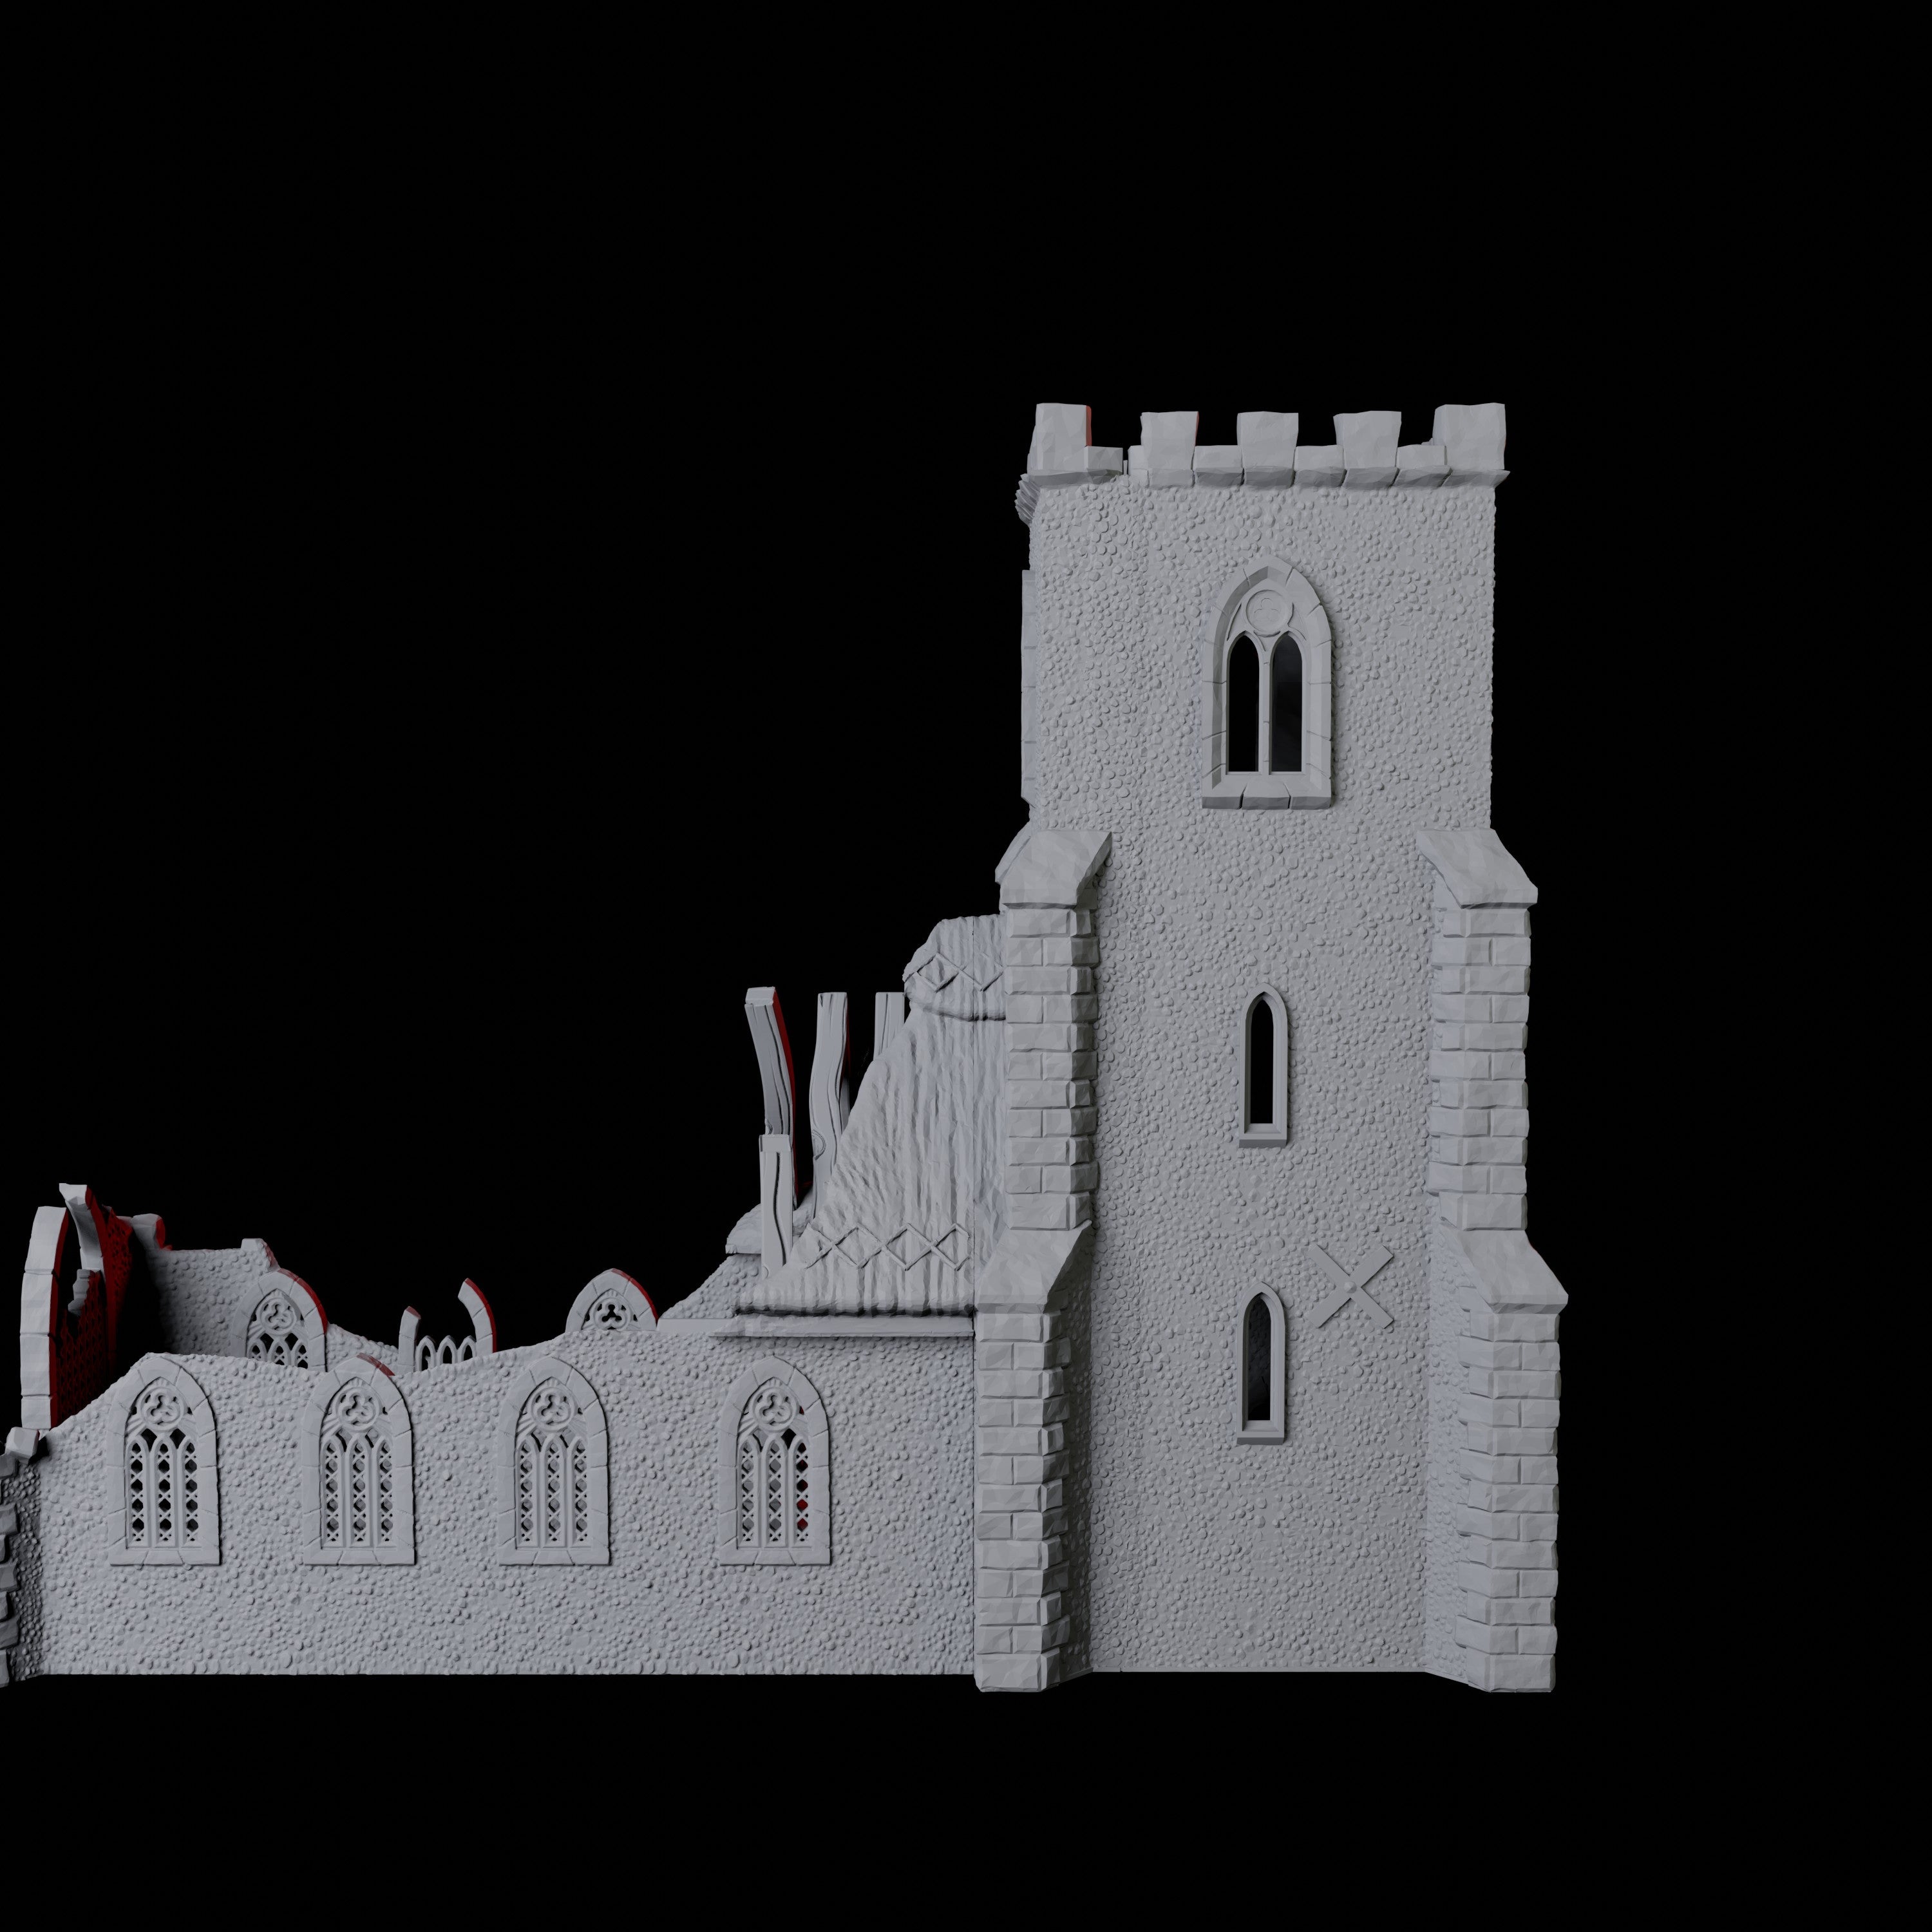 Ruined Church Dice Tower Miniature for Dungeons and Dragons